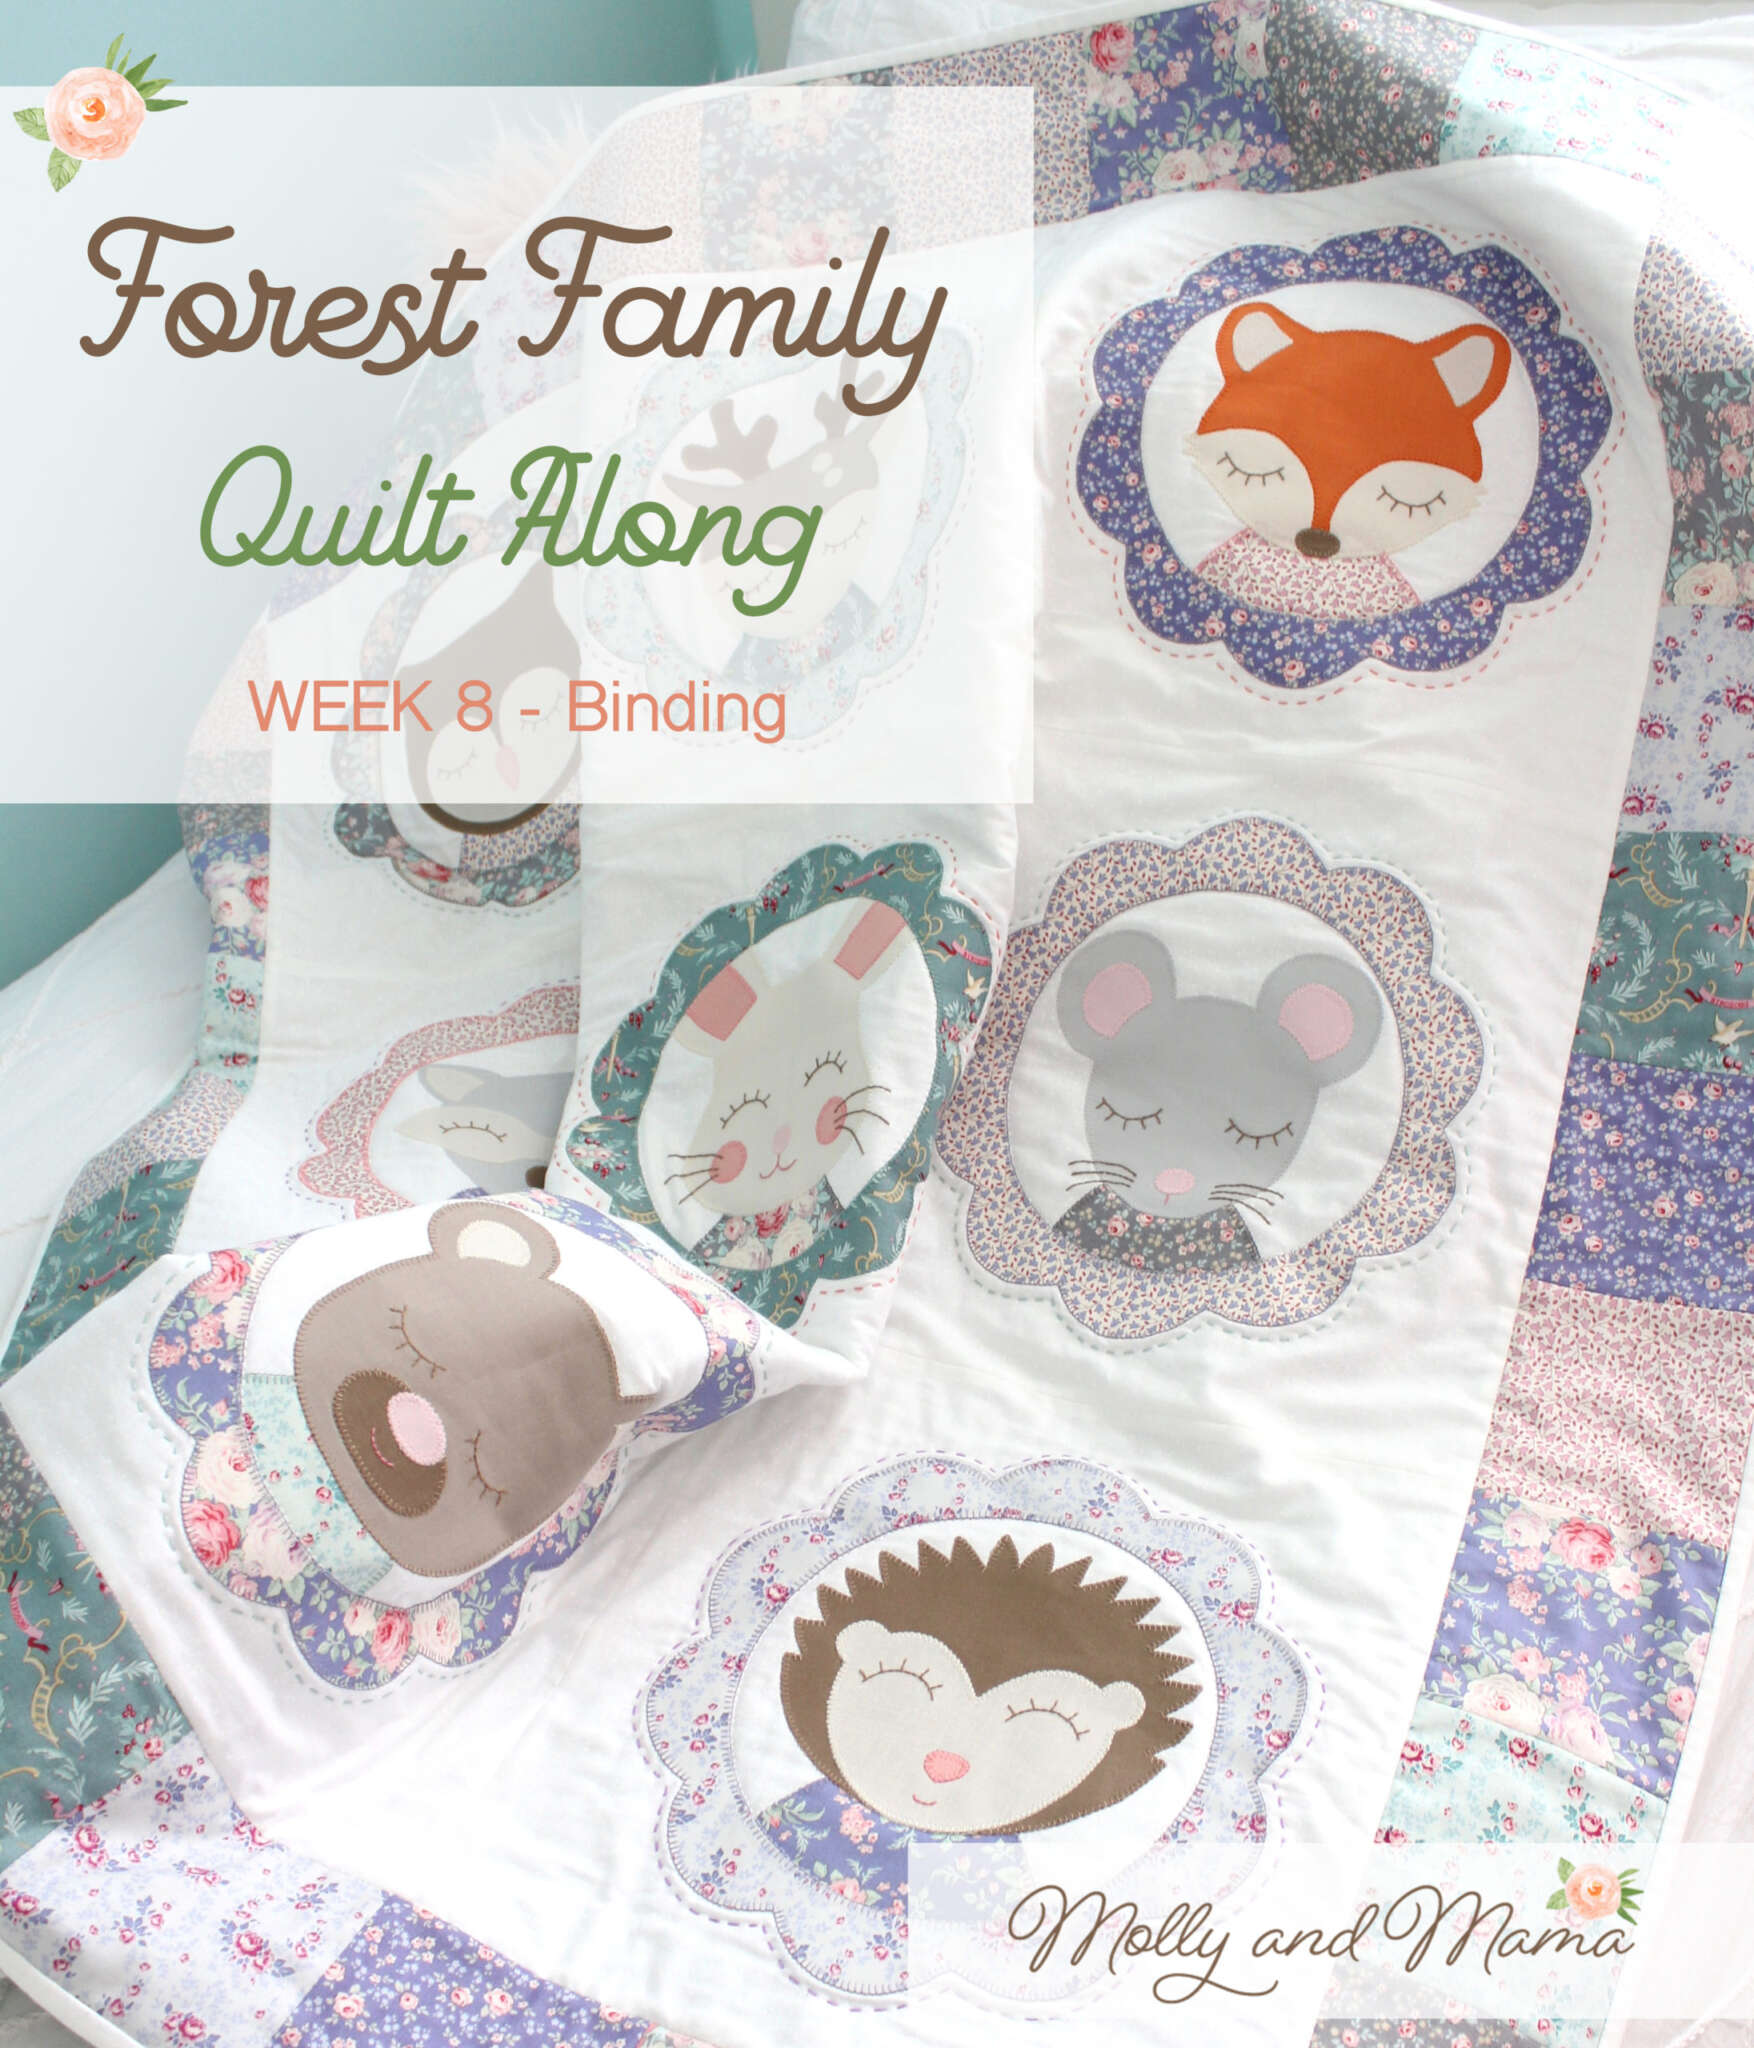 Week 8 – Forest Family Quilt Along